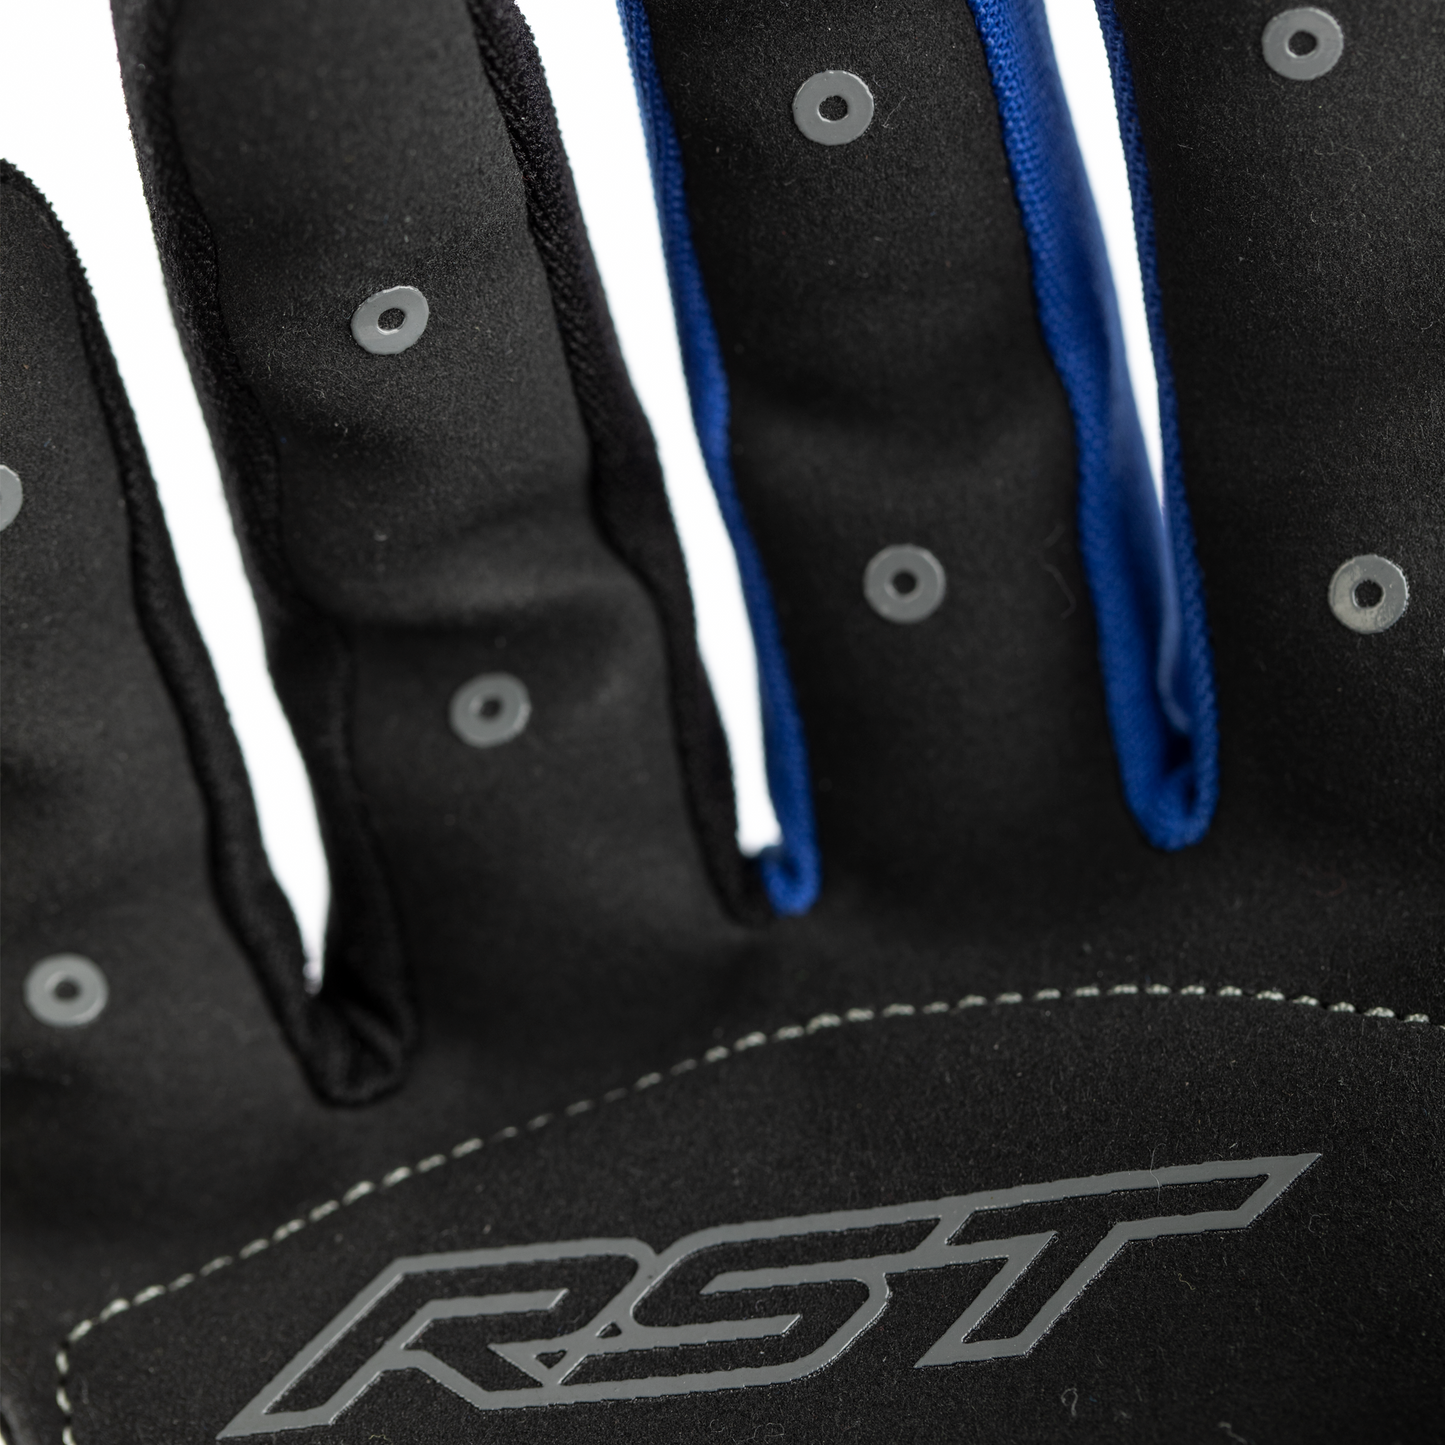 RST Rider Gloves - CE APPROVED - Blue